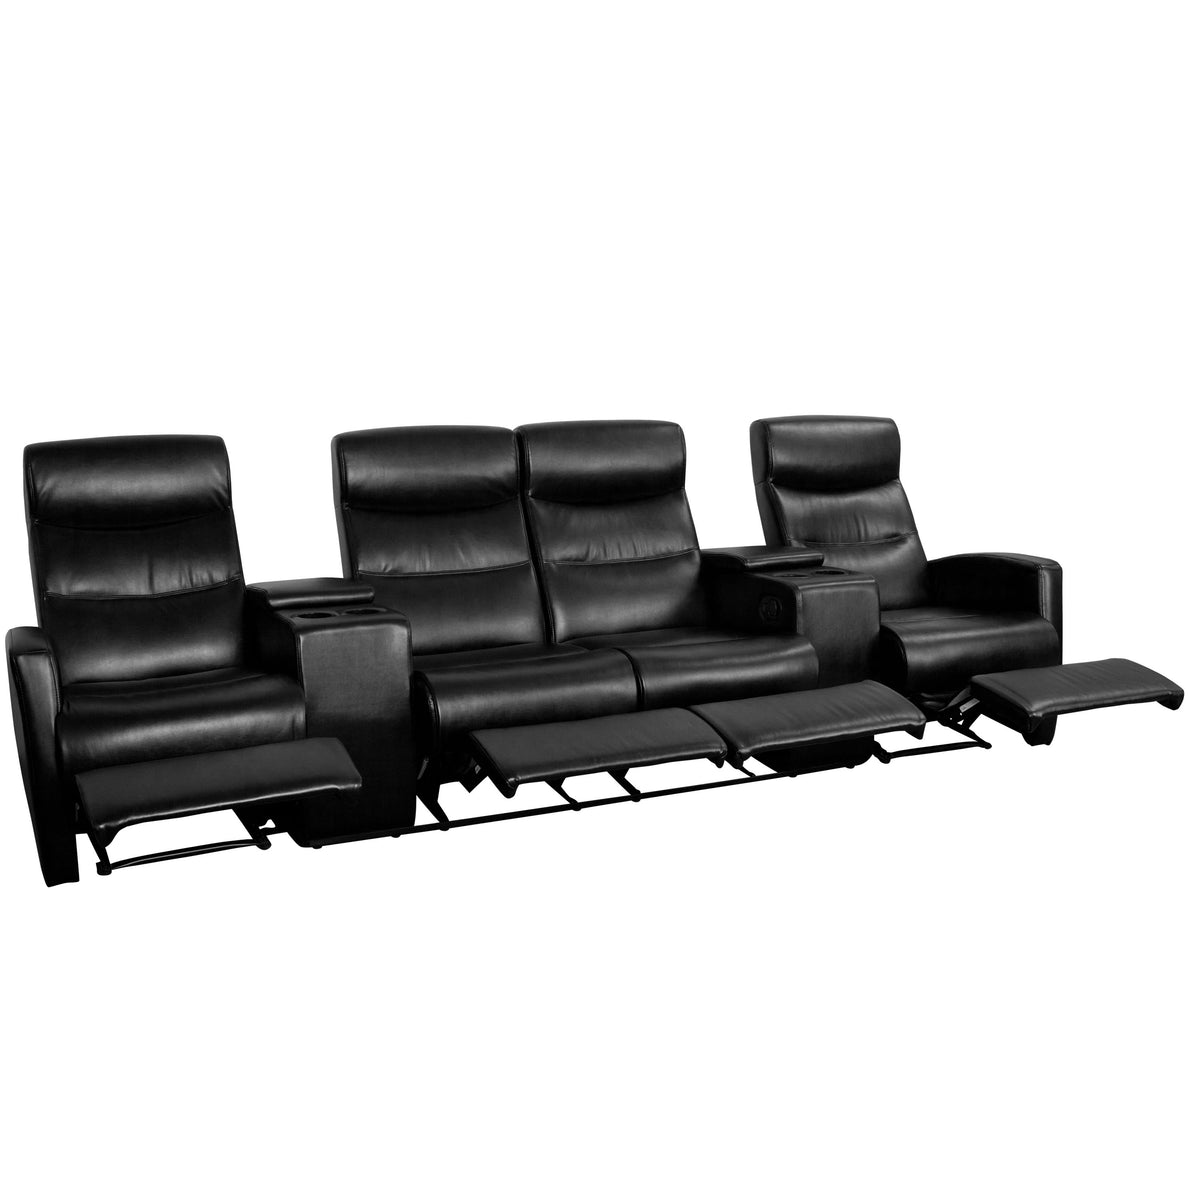 4-Seat Manual Reclining Black LeatherSoft Theater Seating Unit with Cup Holders